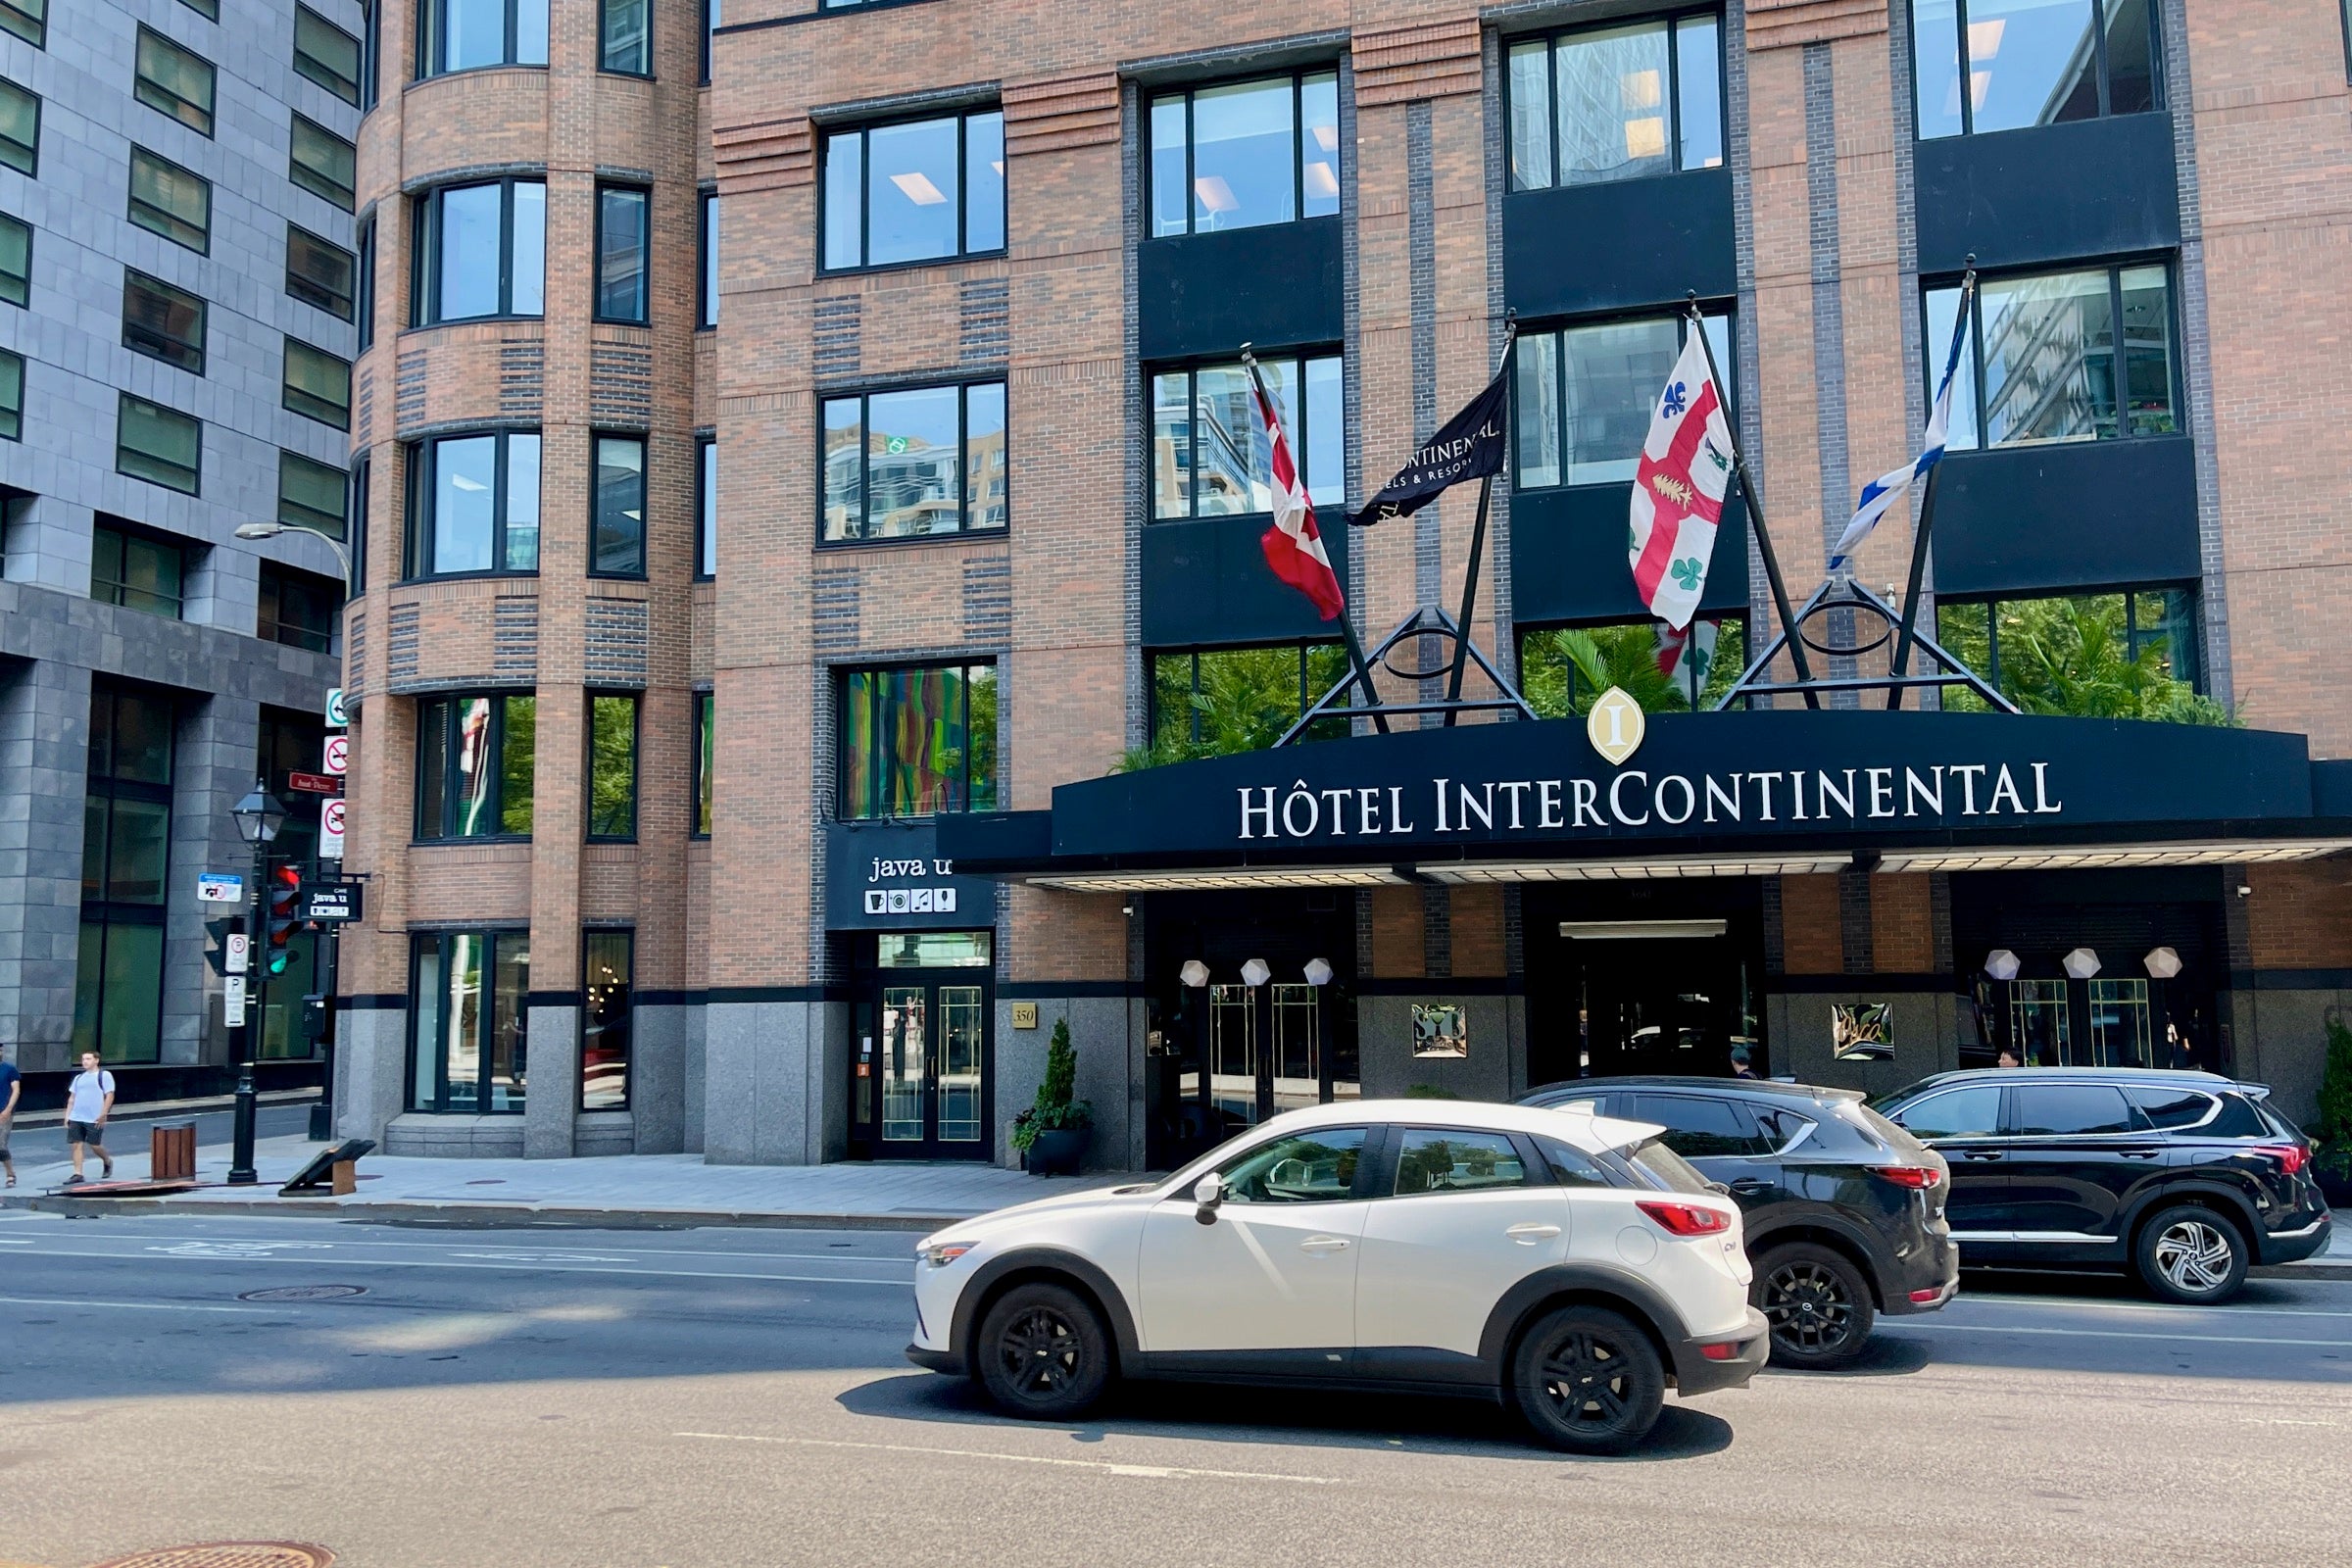 InterContinental Montreal exterior with hotel sign